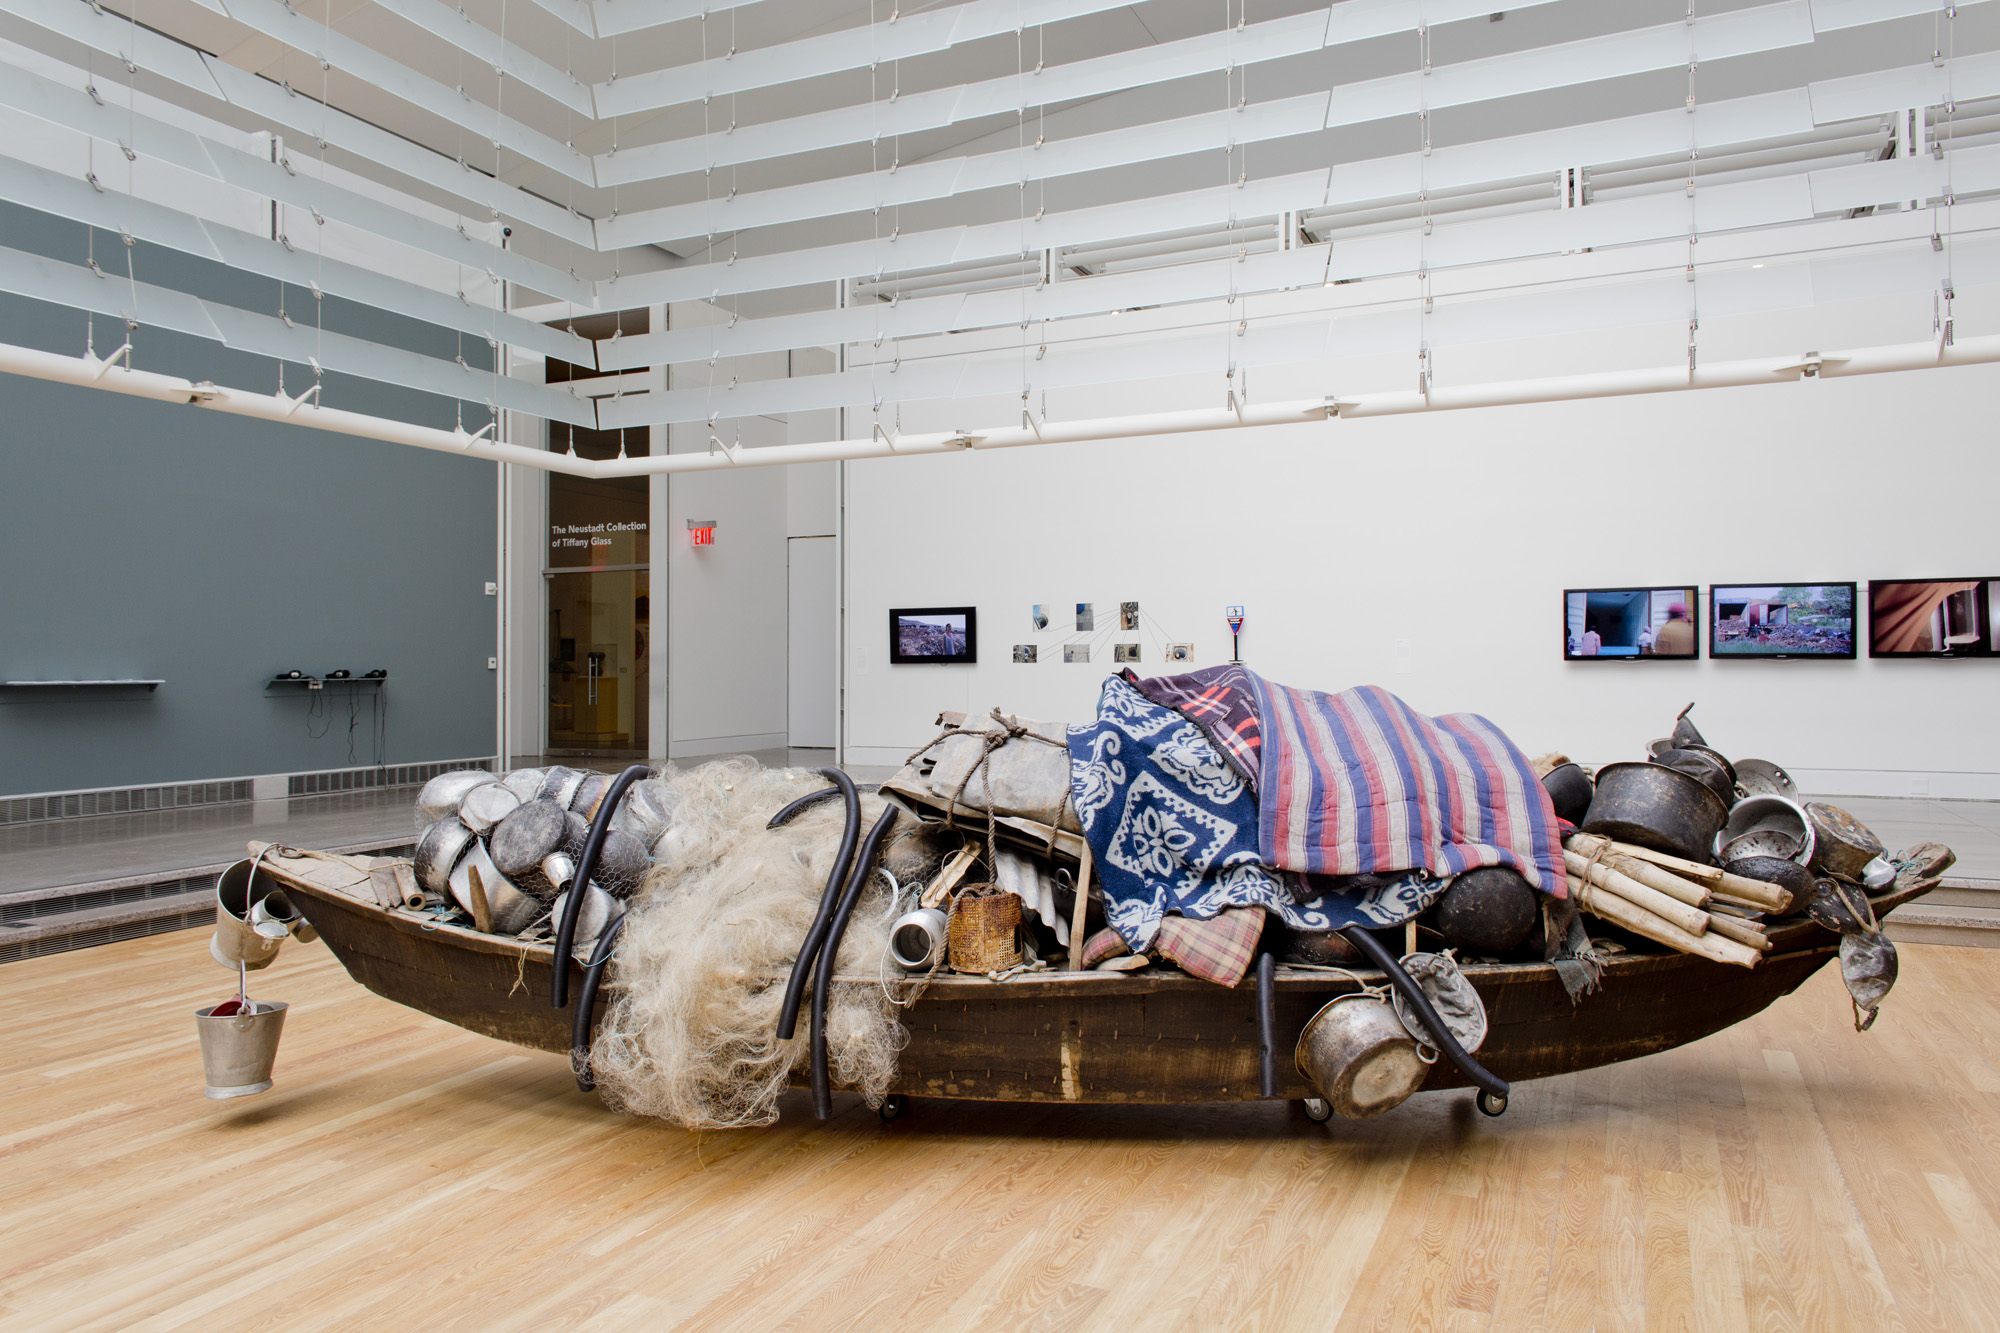 A found object sculpture installed in a hardwood exhibition floor. The sculpture is made of a weathered boat, overflowing with cooking pots, utensils, fabric, steel, a fishing net, bamboo, rope and a plastic pipe.